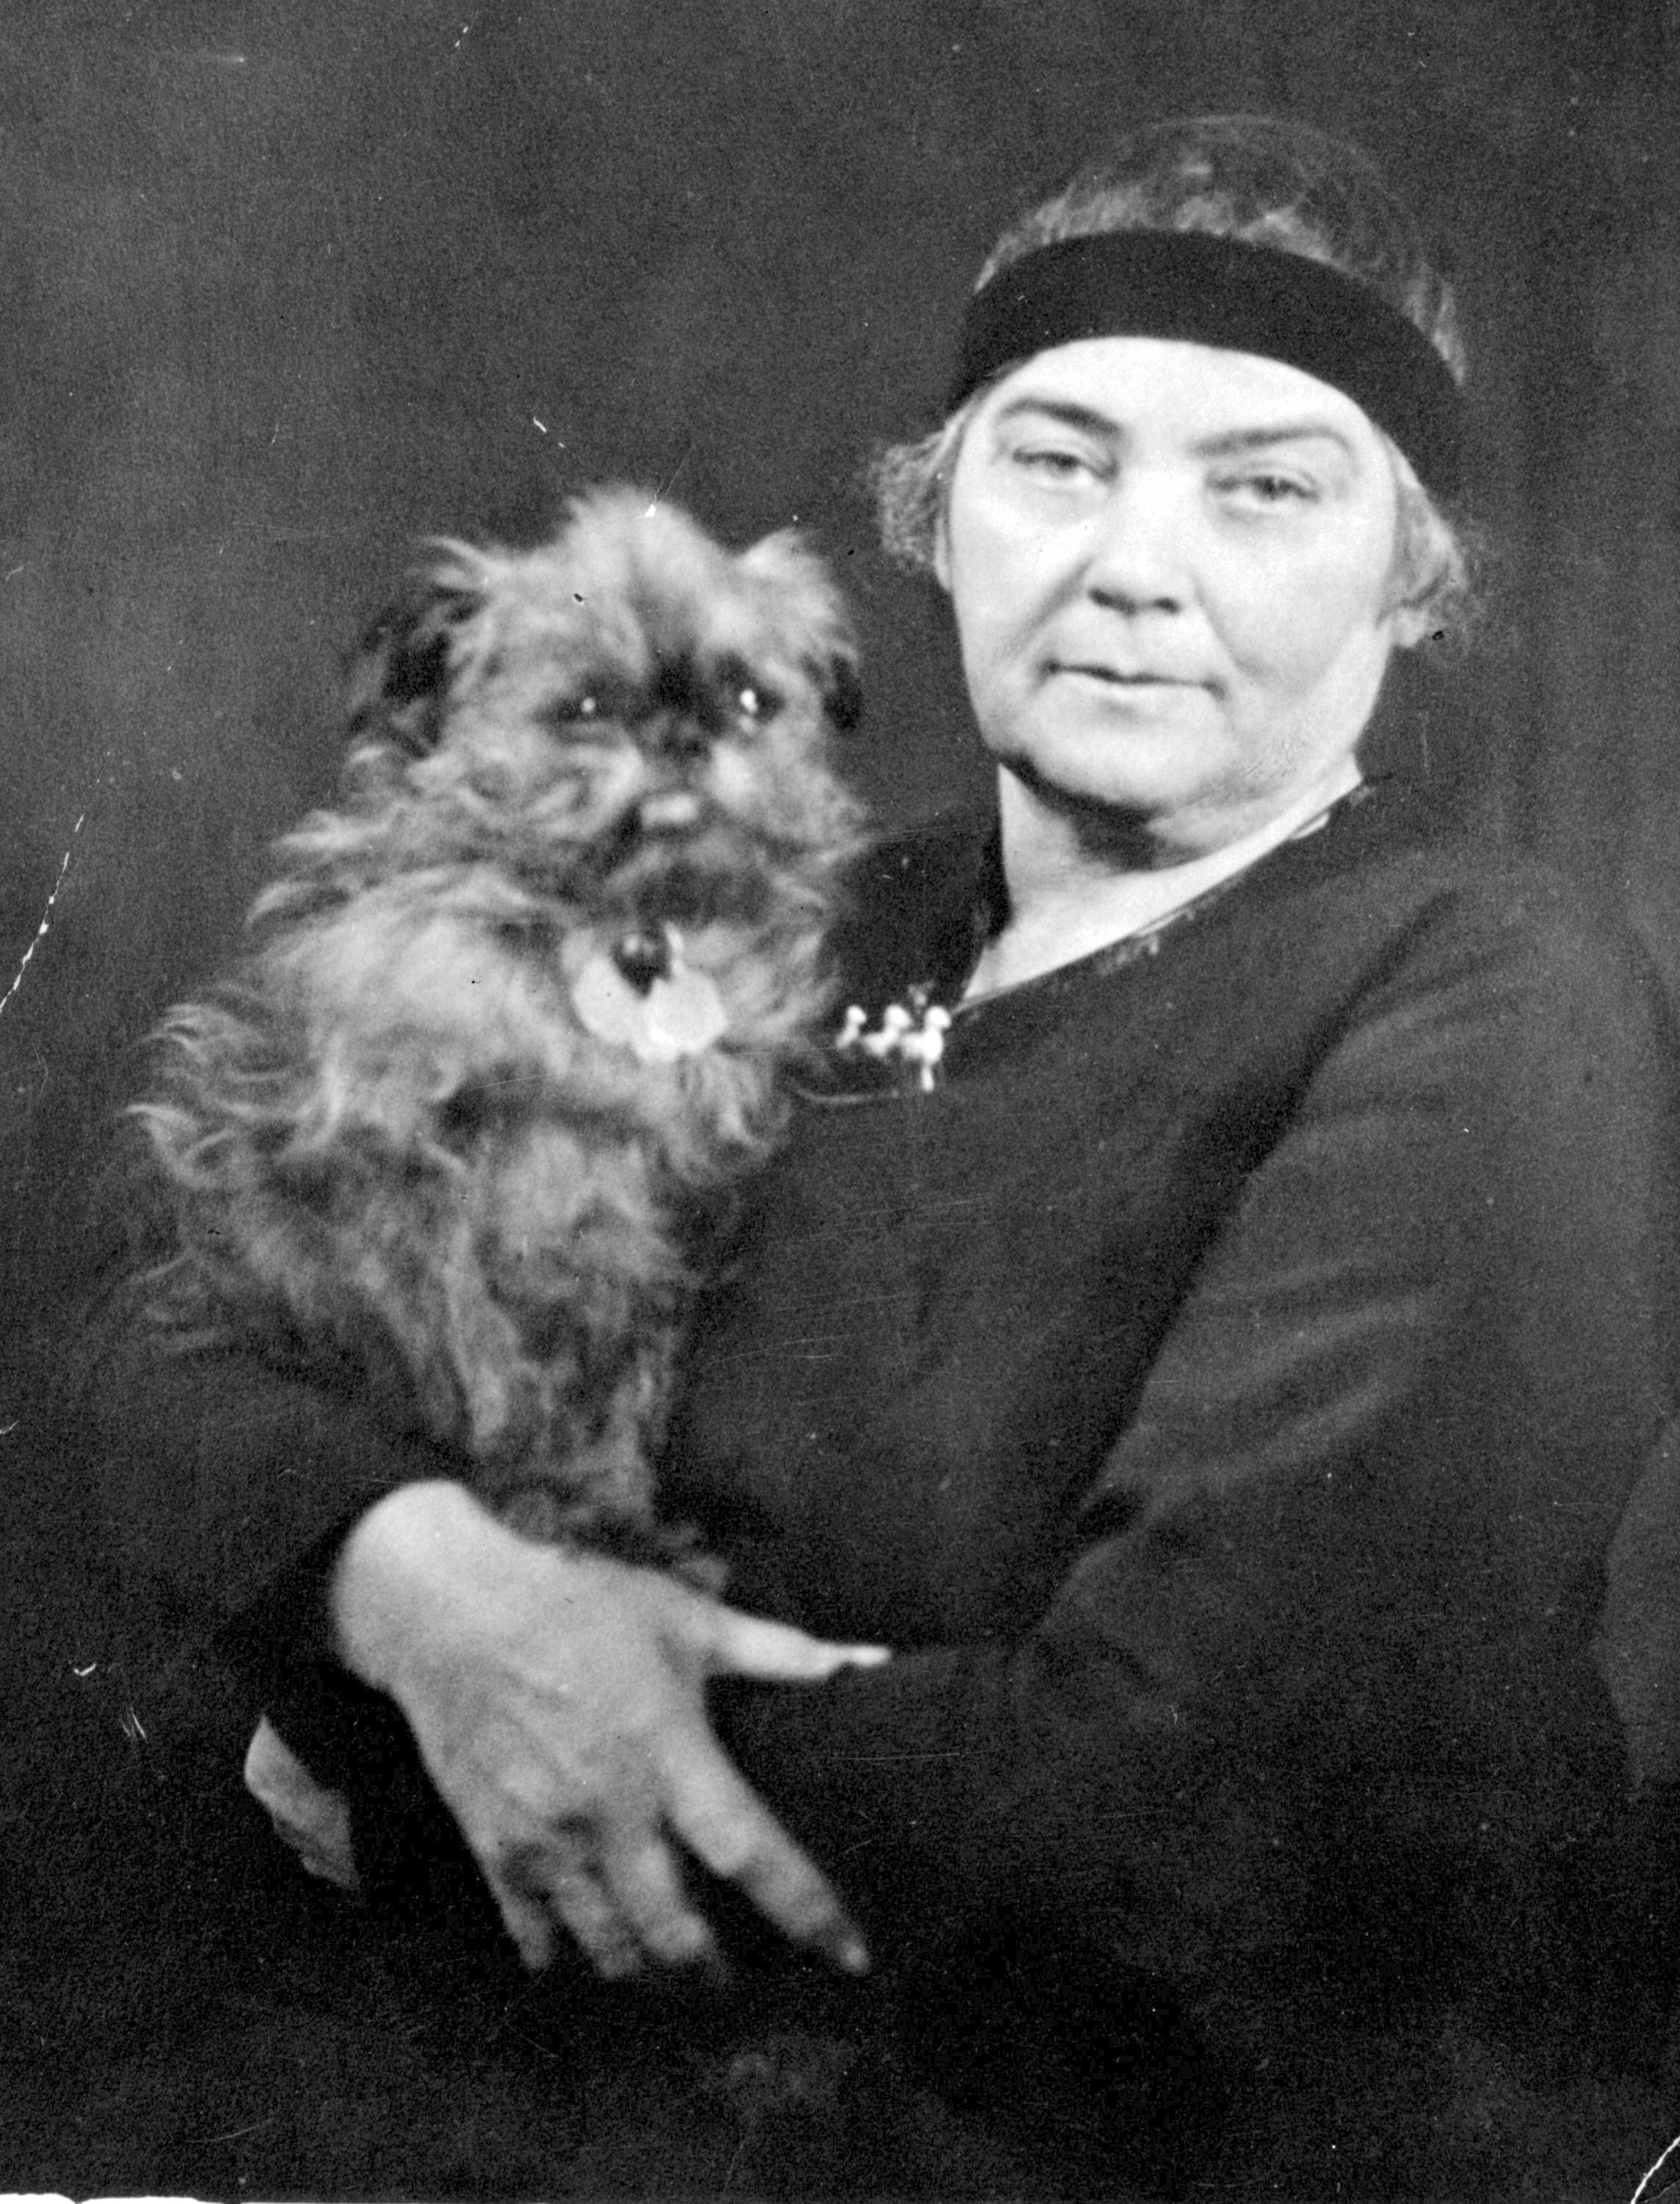 Emily Carr - December 13, 1871 - March 2, 1945